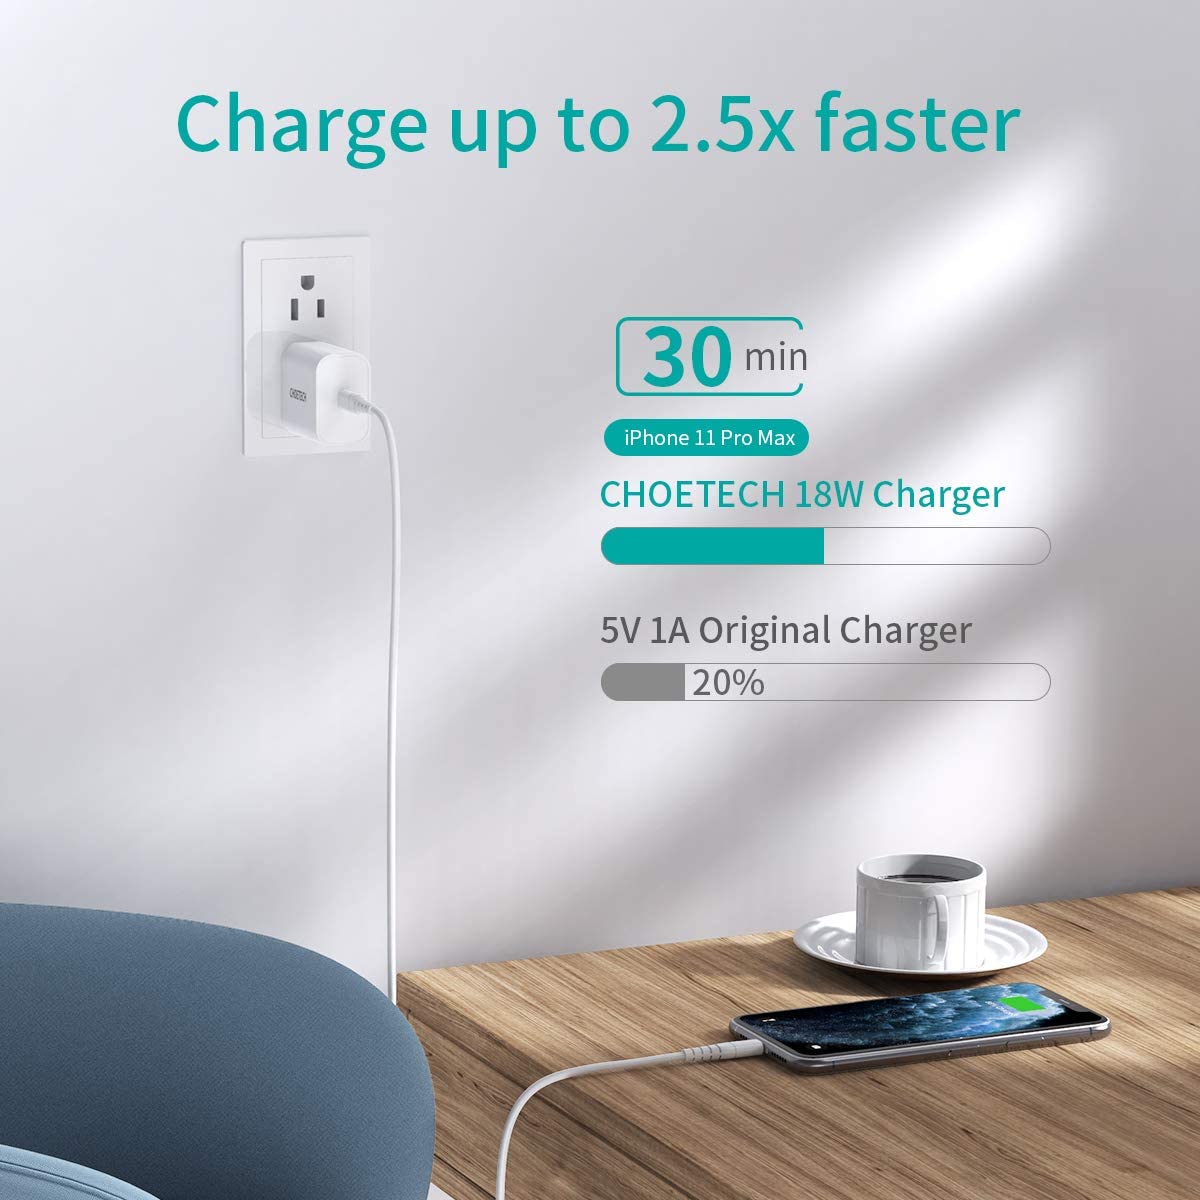 iPhone 15 Charger-USB C Charger-Apple MFi Certified-iPad Pro Charger iPad  Air Mini Charger with 6FT Cable for iPhone 15/iPhone 15 Pro/iPhone 15 Pro  Max/iPad Pro/Mini/Air4/AirPods 